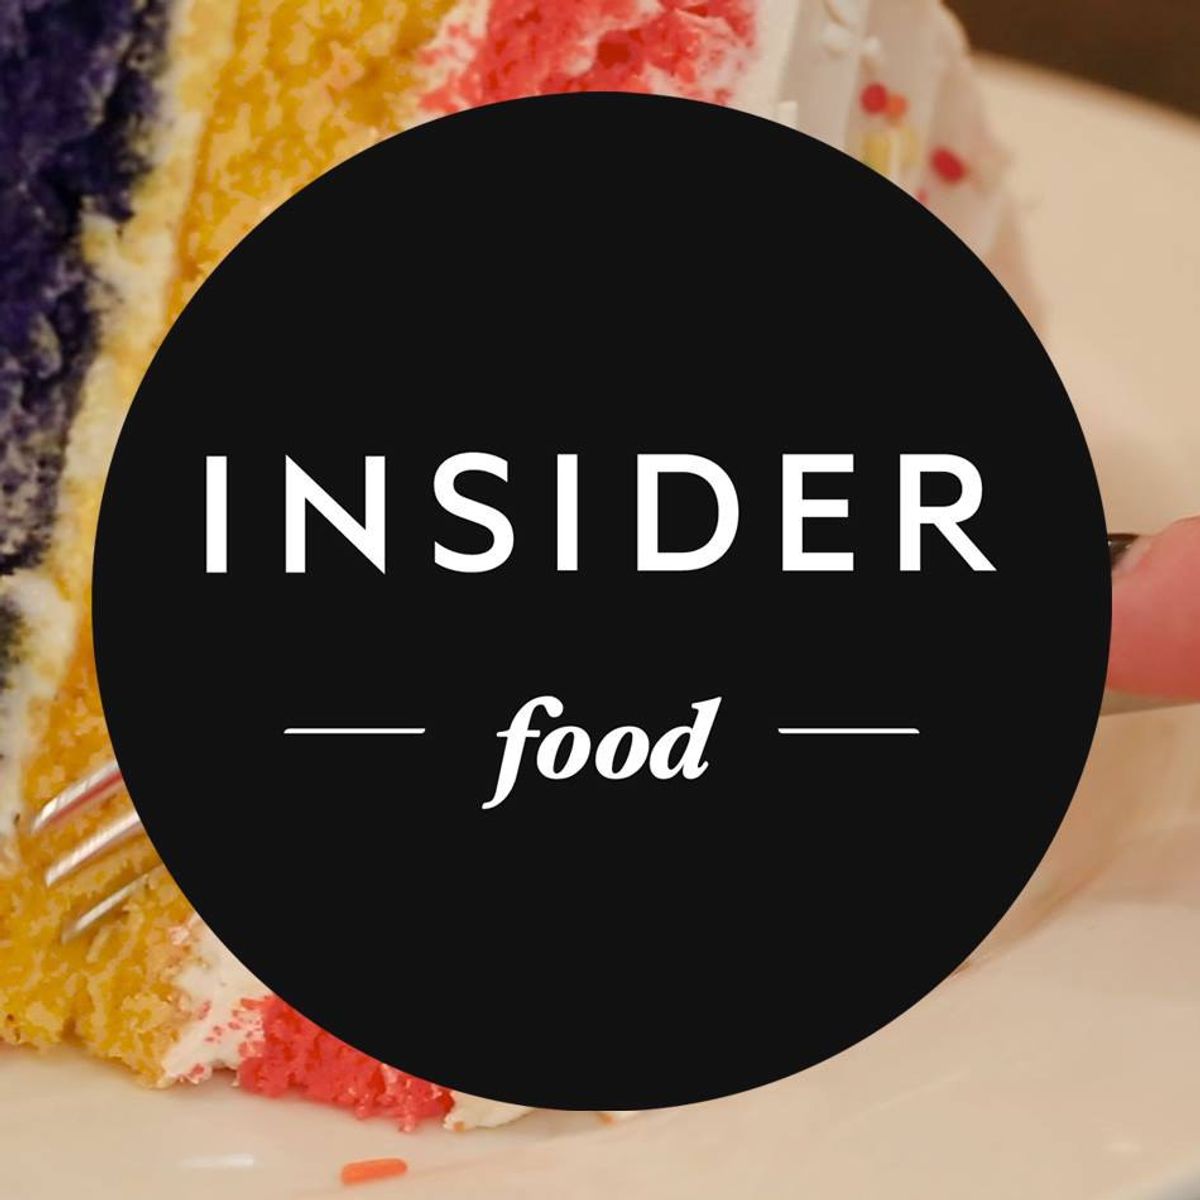 5 NYC INSIDER Food Trends Ranked